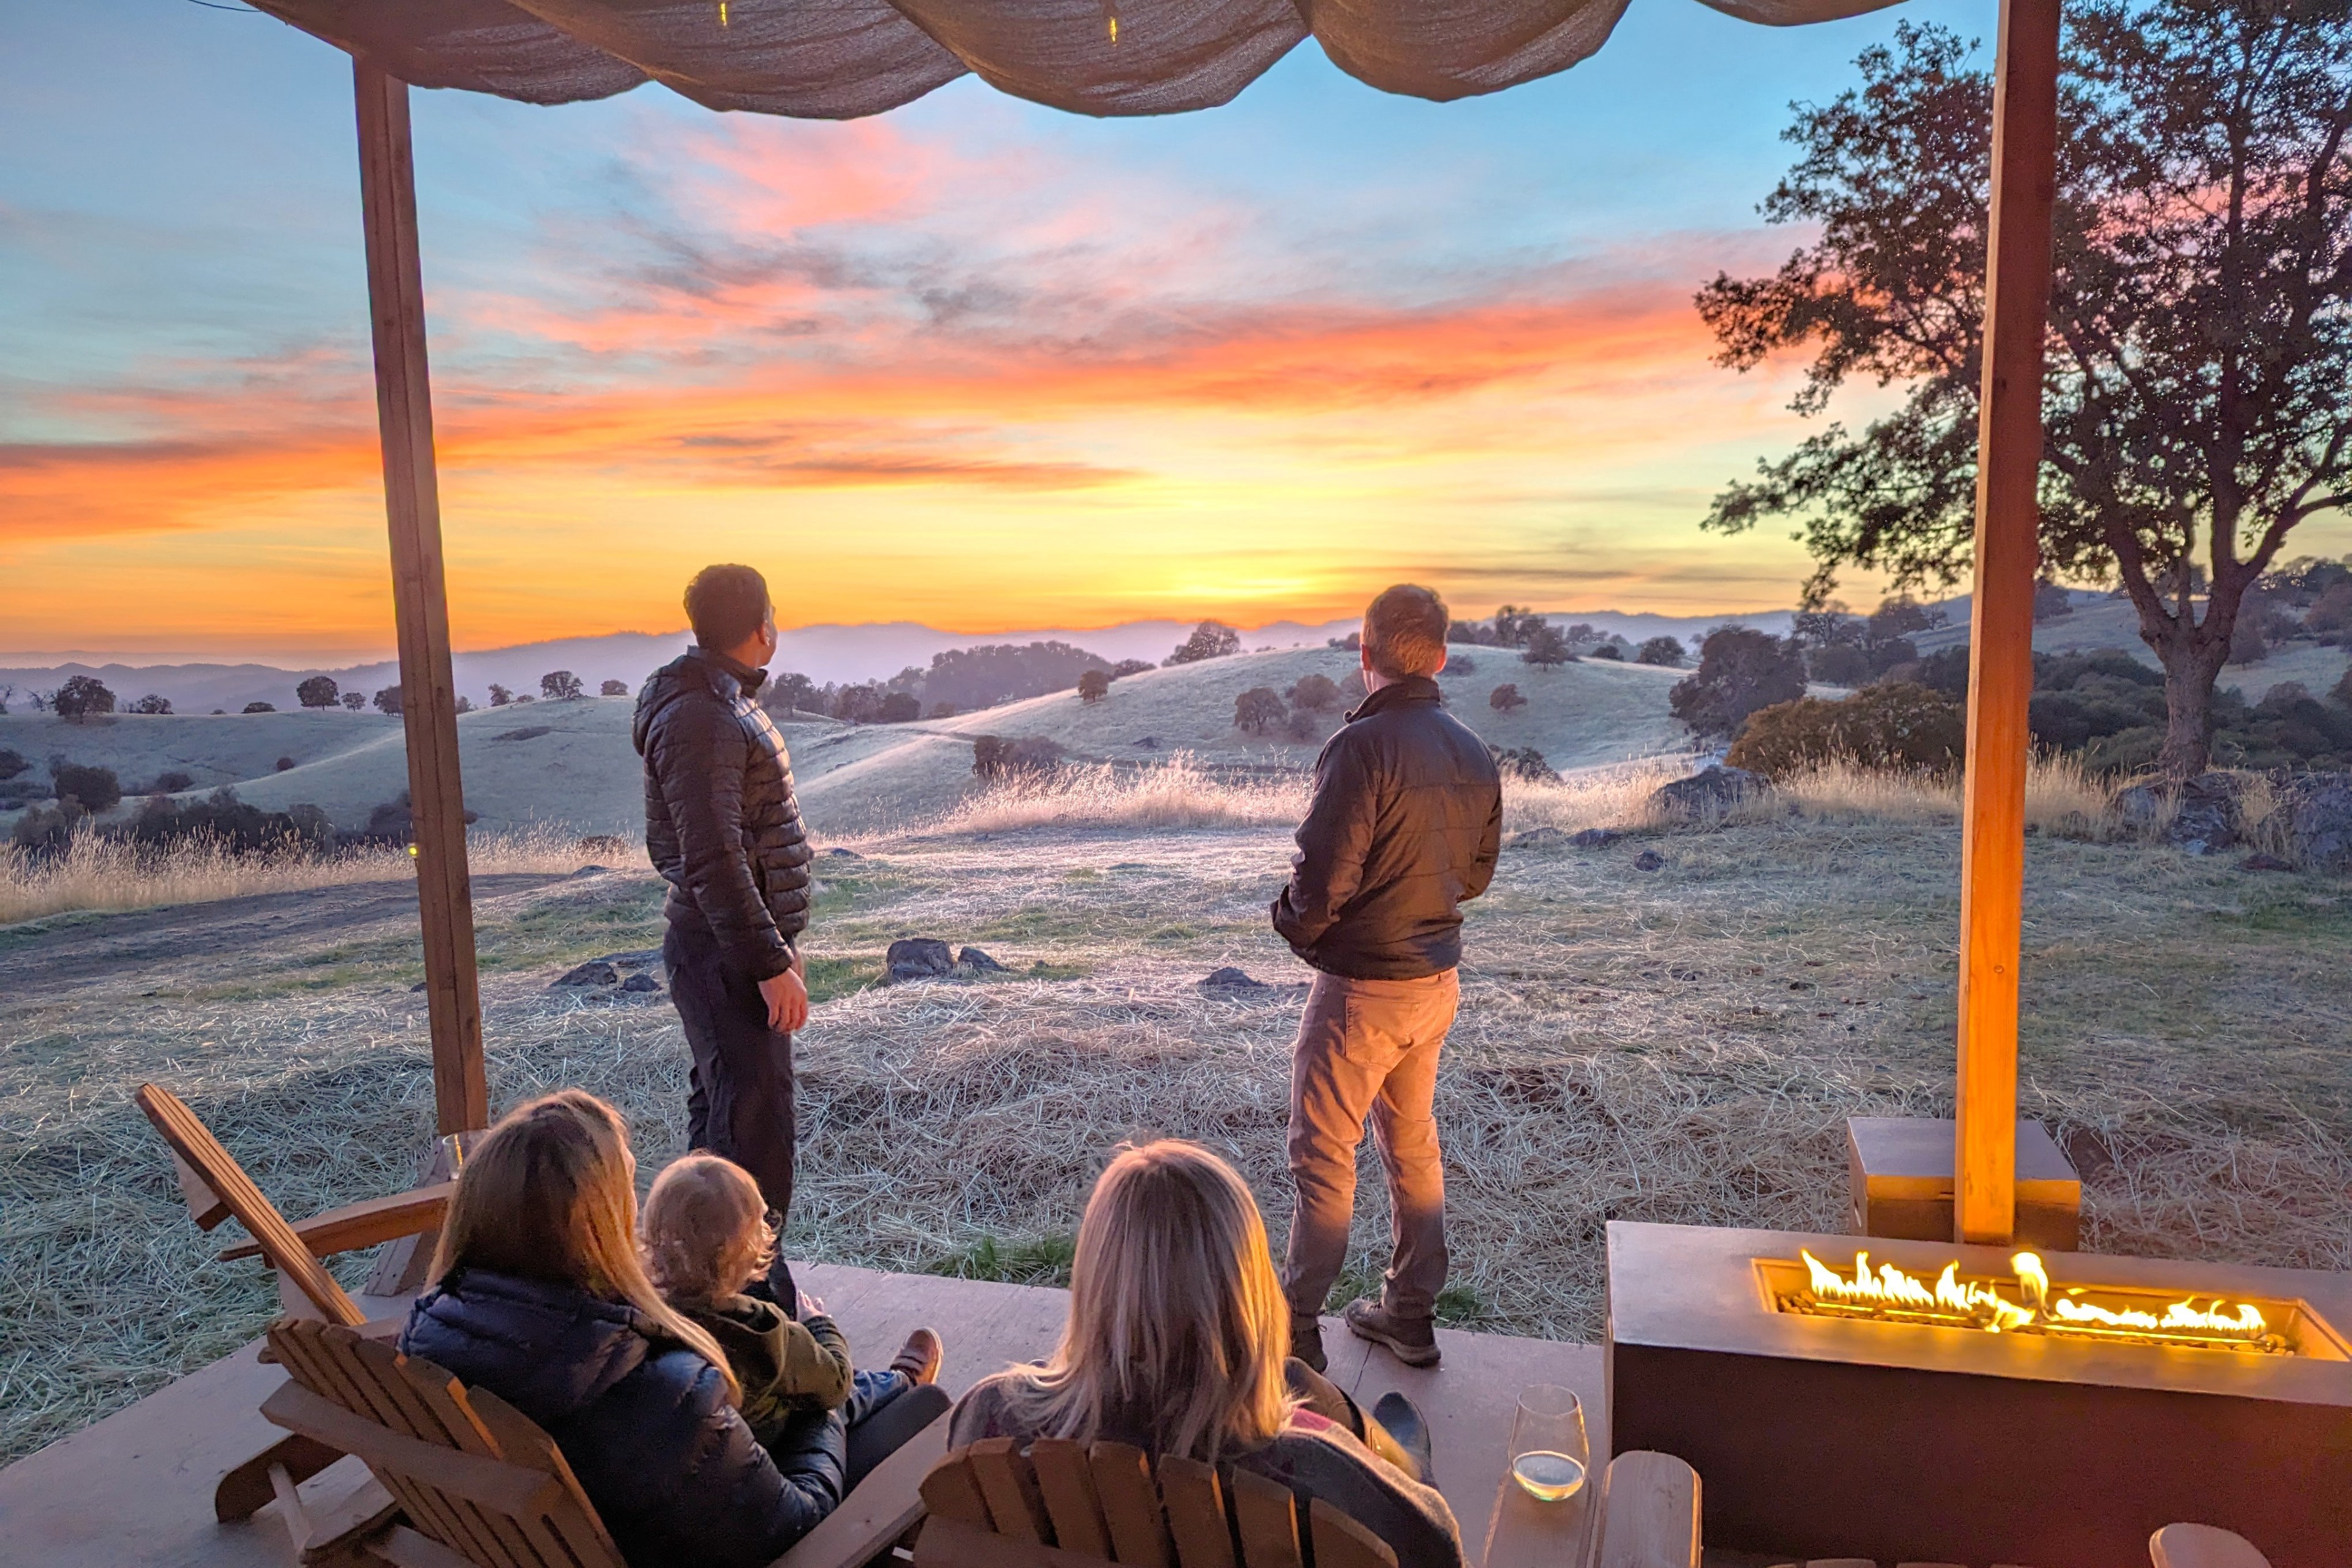 Five people under a canopy enjoy a scenic sunset view over rolling hills. Two stand looking out, while three sit by a modern outdoor fireplace, with drinks.